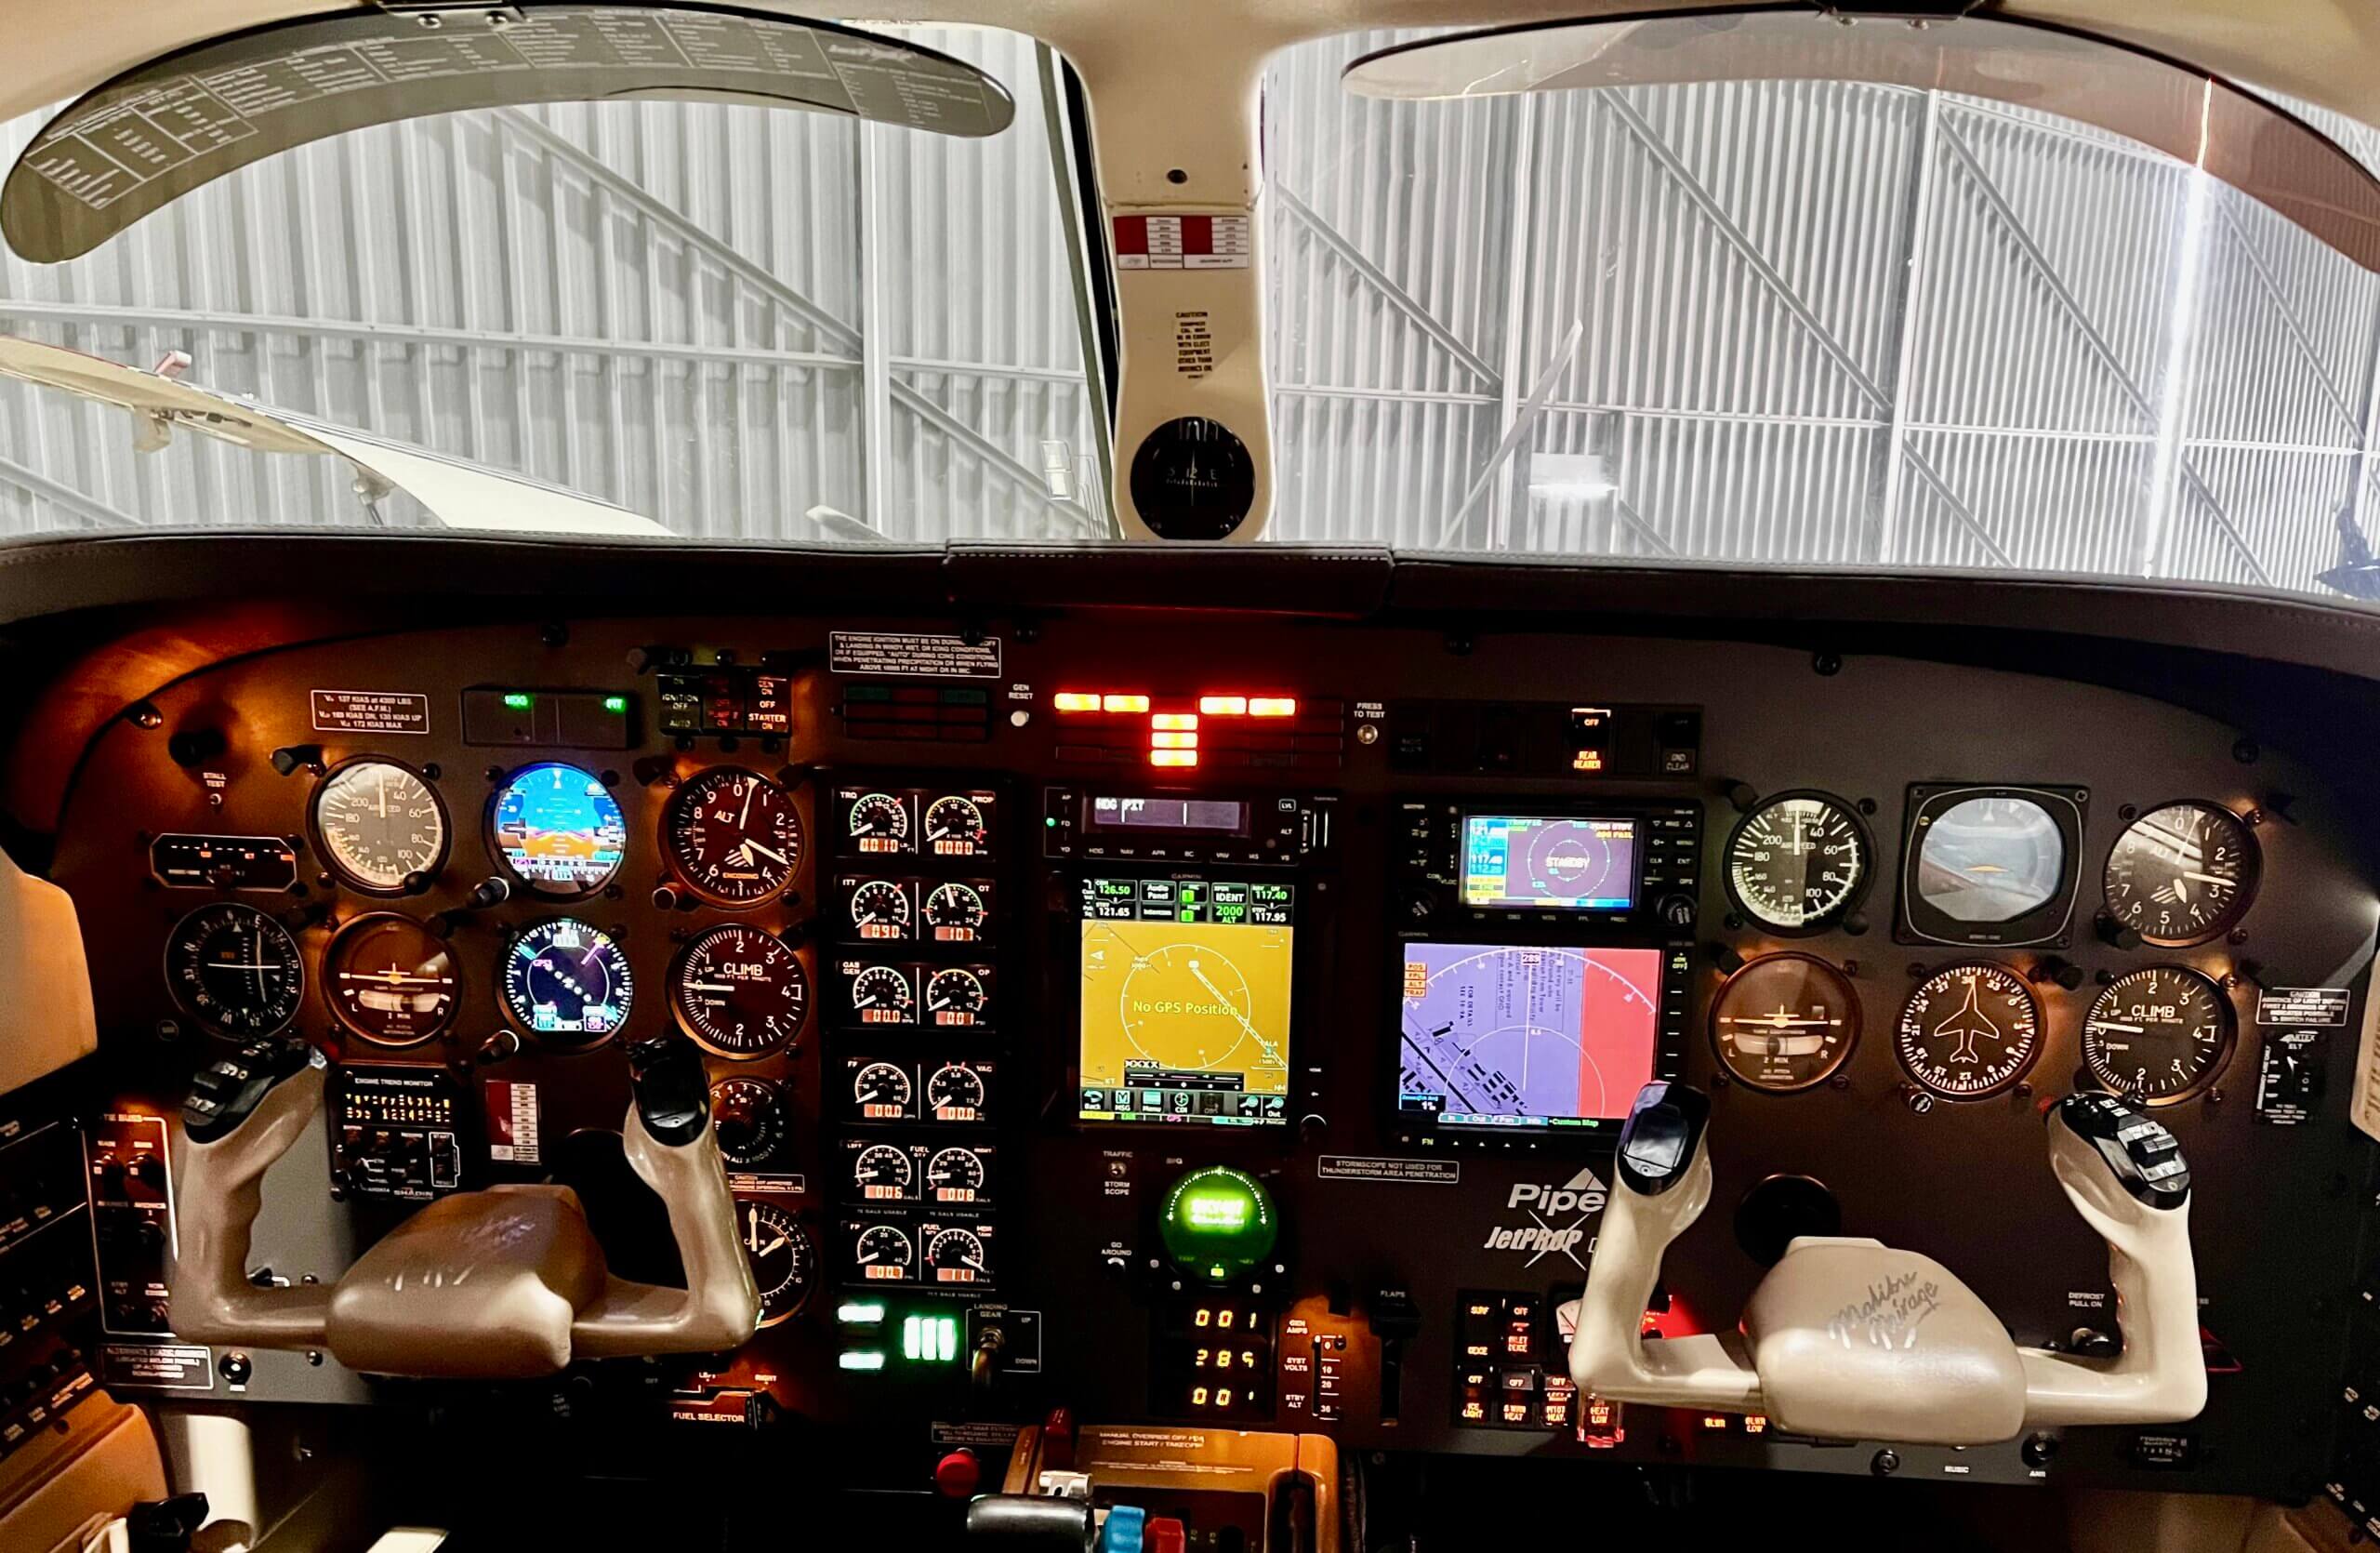 Install Dual Garmin GI 275's, GSB 15, GTN 750Xi, GMA 35c Audio Panel, GTX 345 Remote ADS-B in/out Transponder and GFC 600 Autopilot System into a Piper Jet Prop.